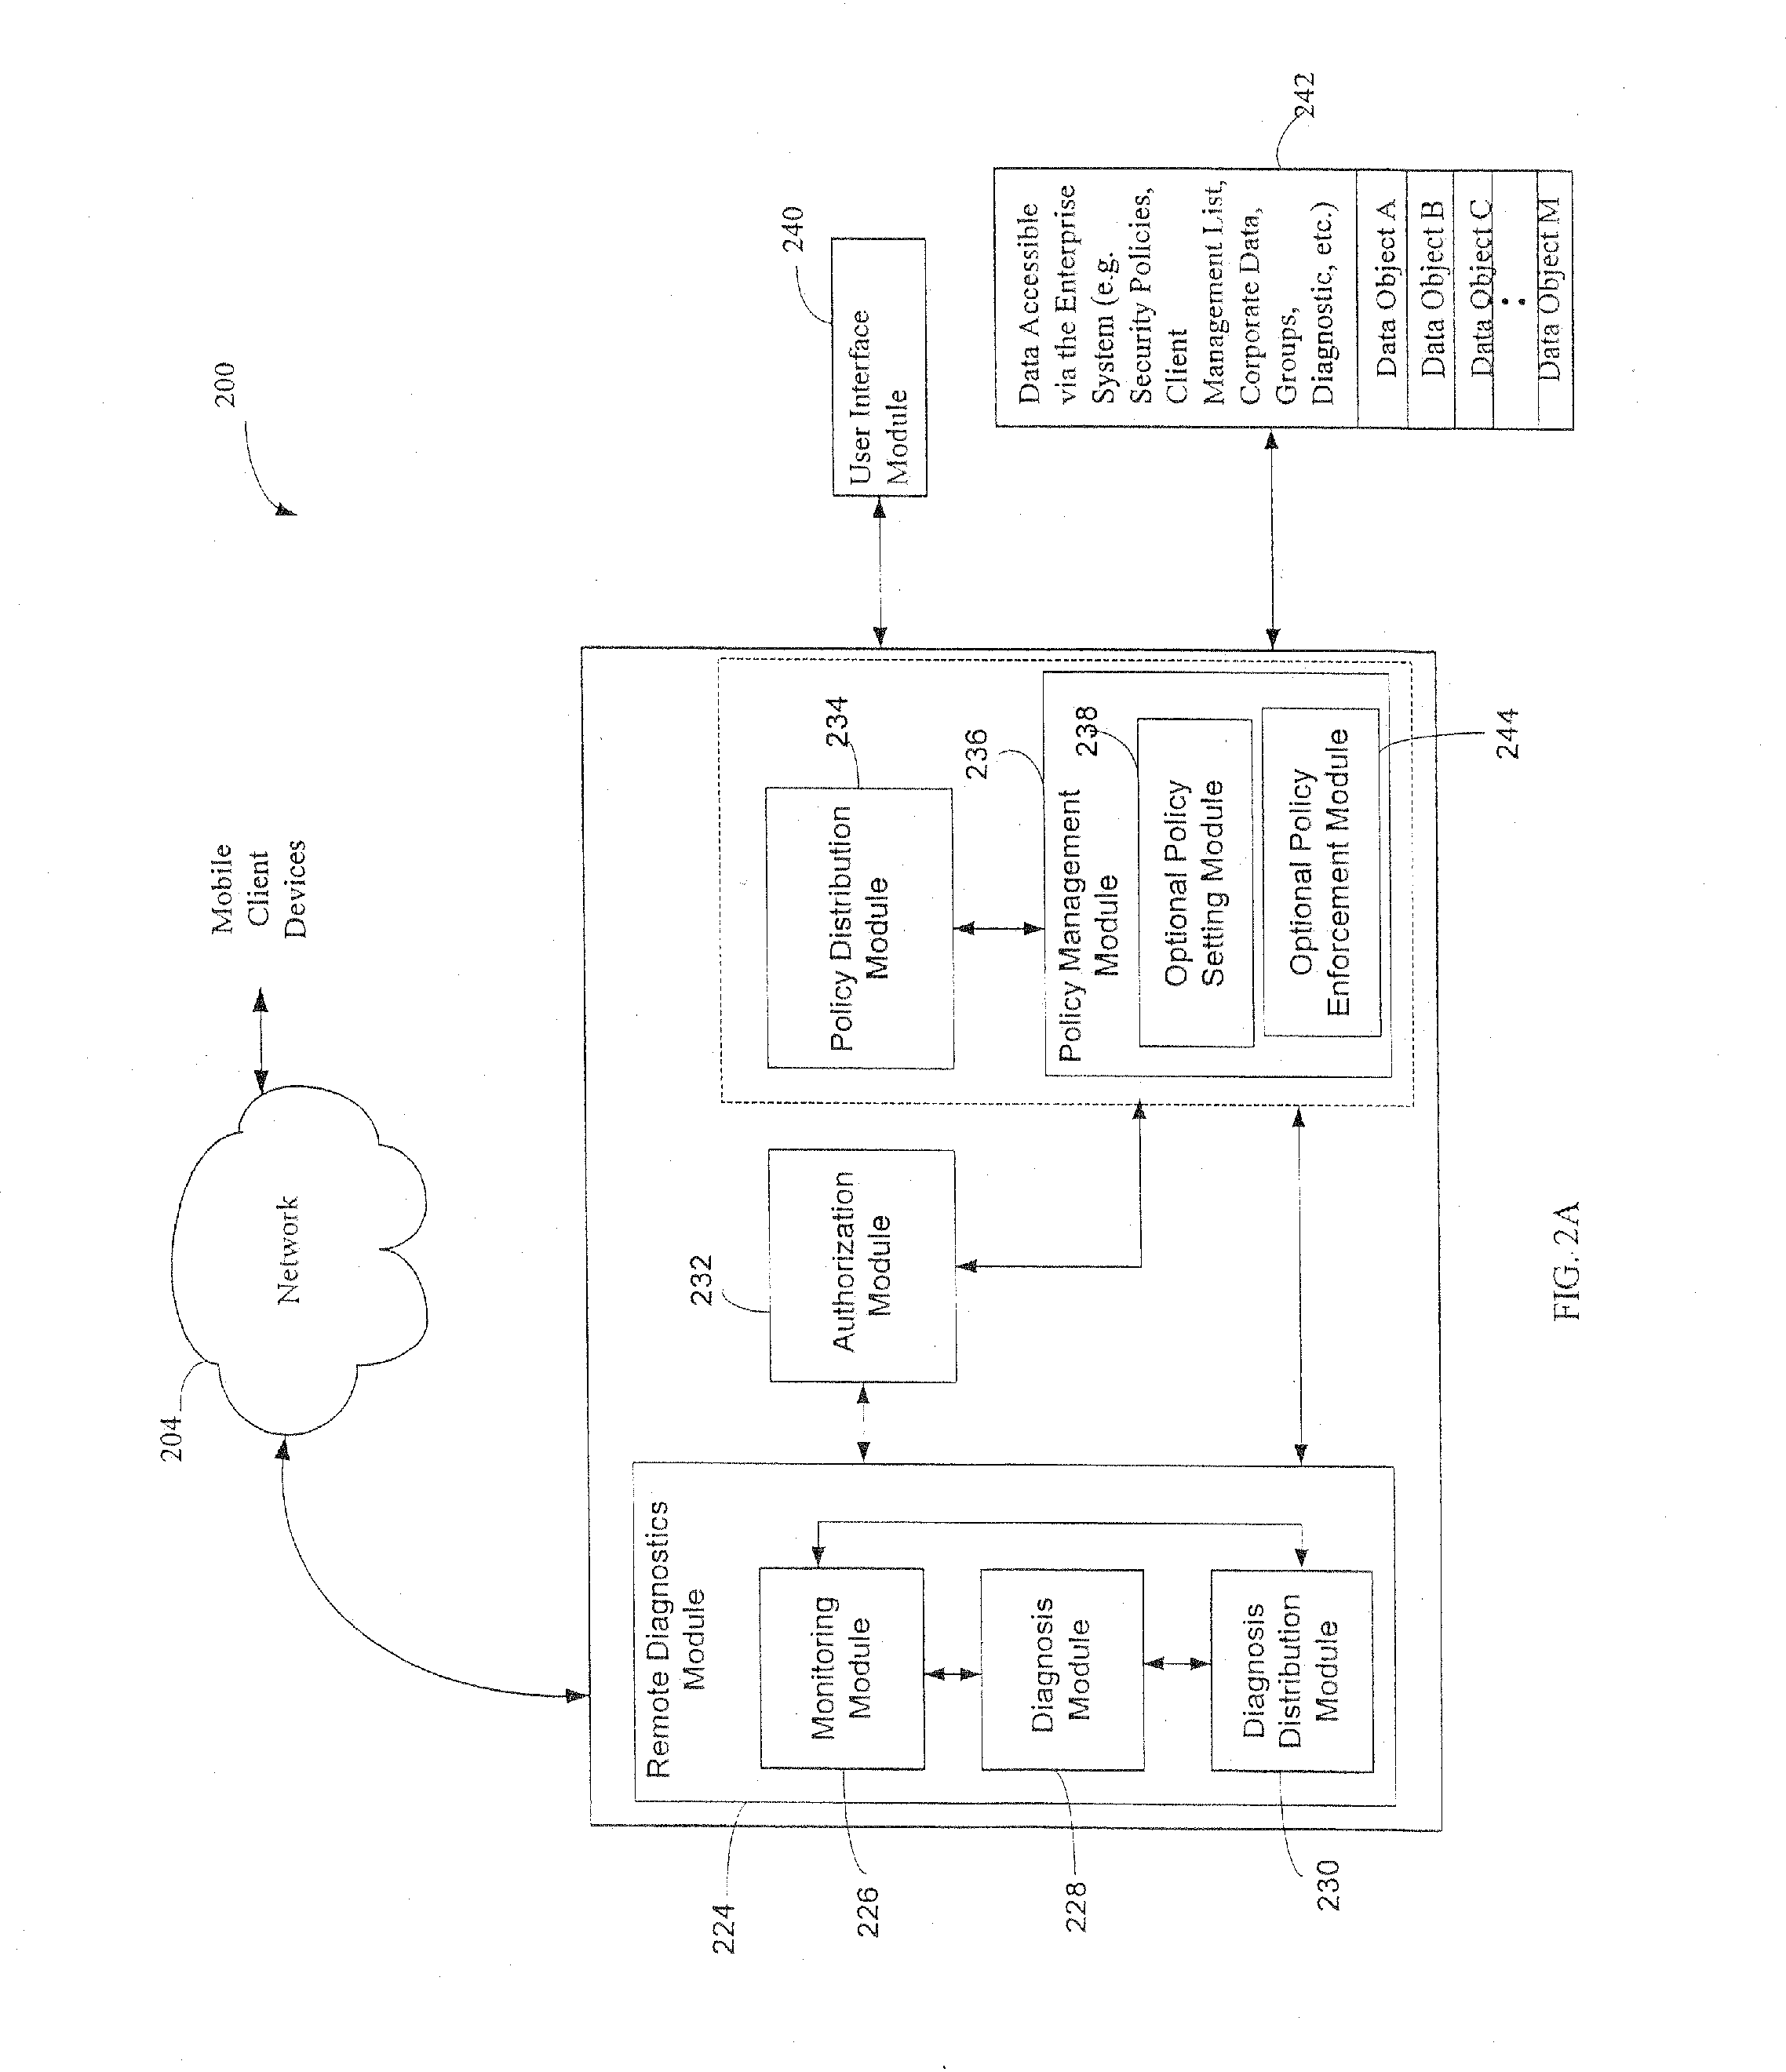 Administration of protection of data accessible by a mobile device